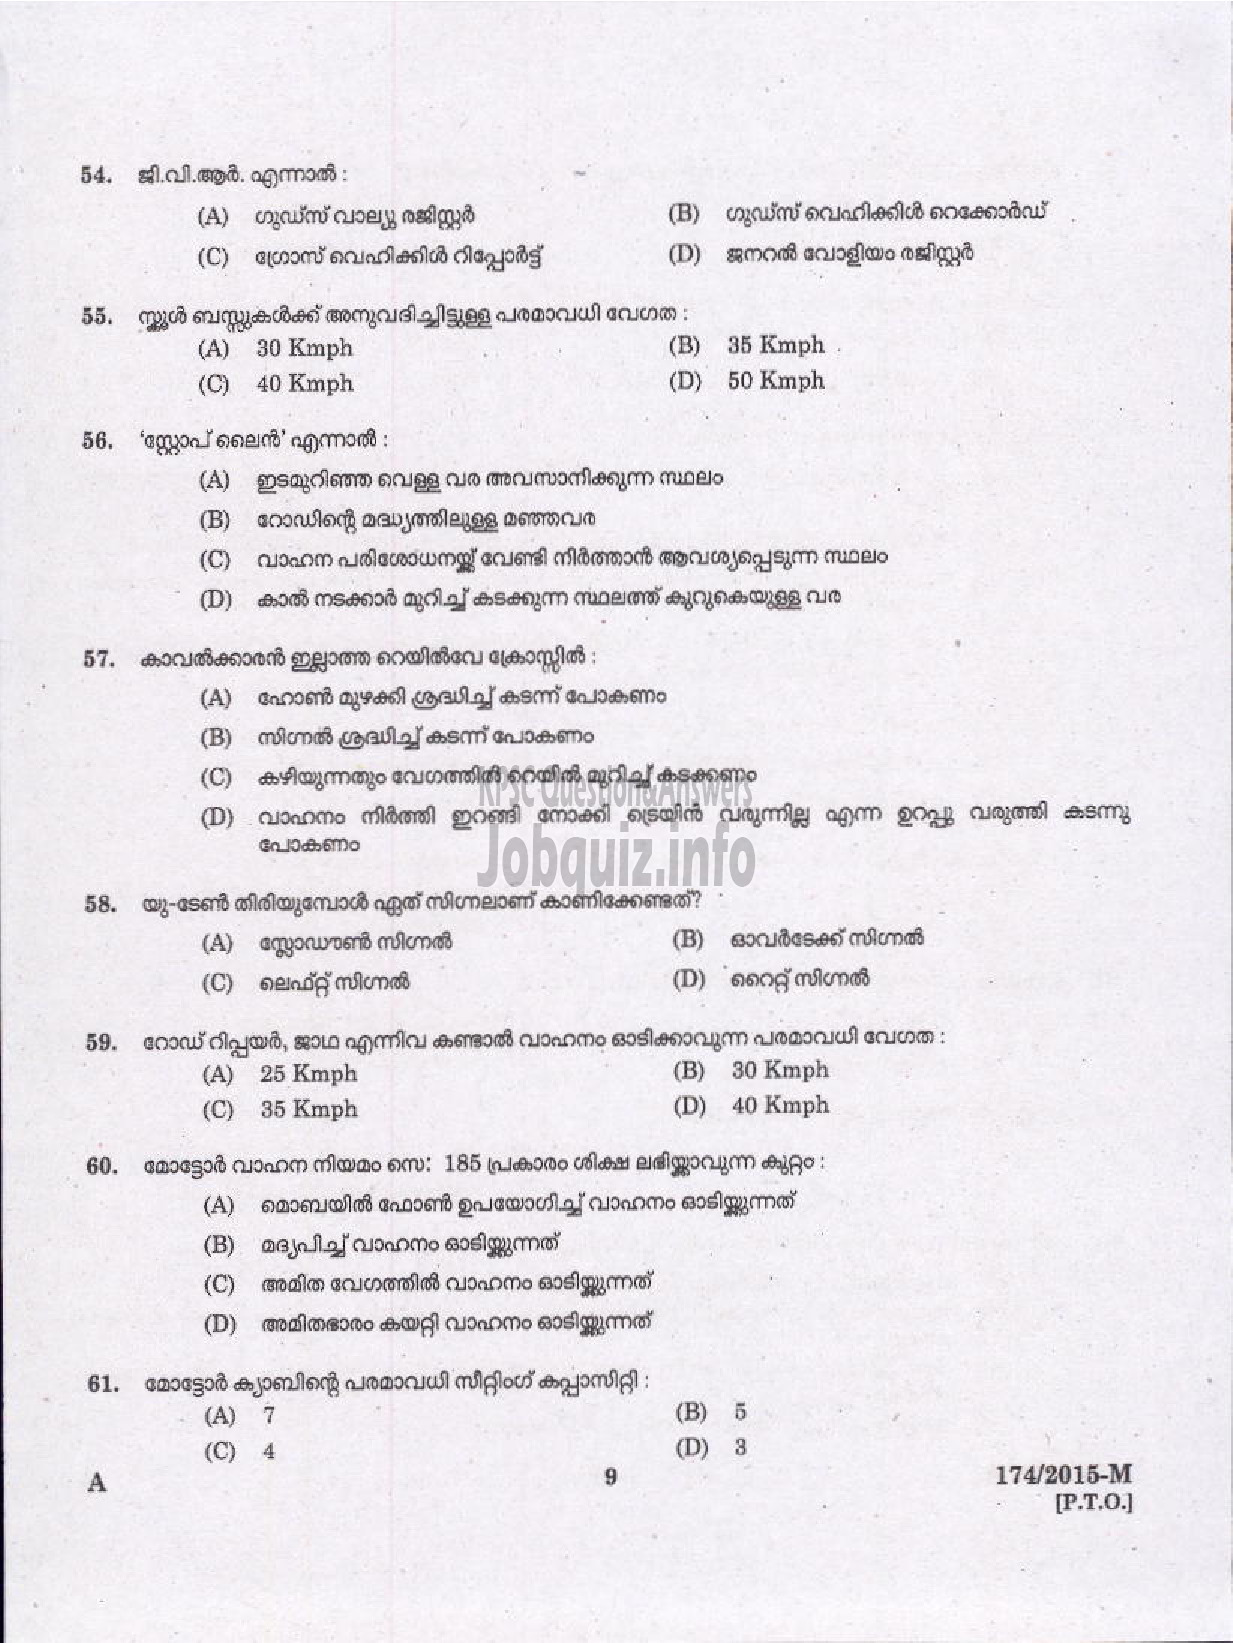 Kerala PSC Question Paper - DRIVER GRADE GR II HDV VARIOUS/EXCISE ( Malayalam ) -7